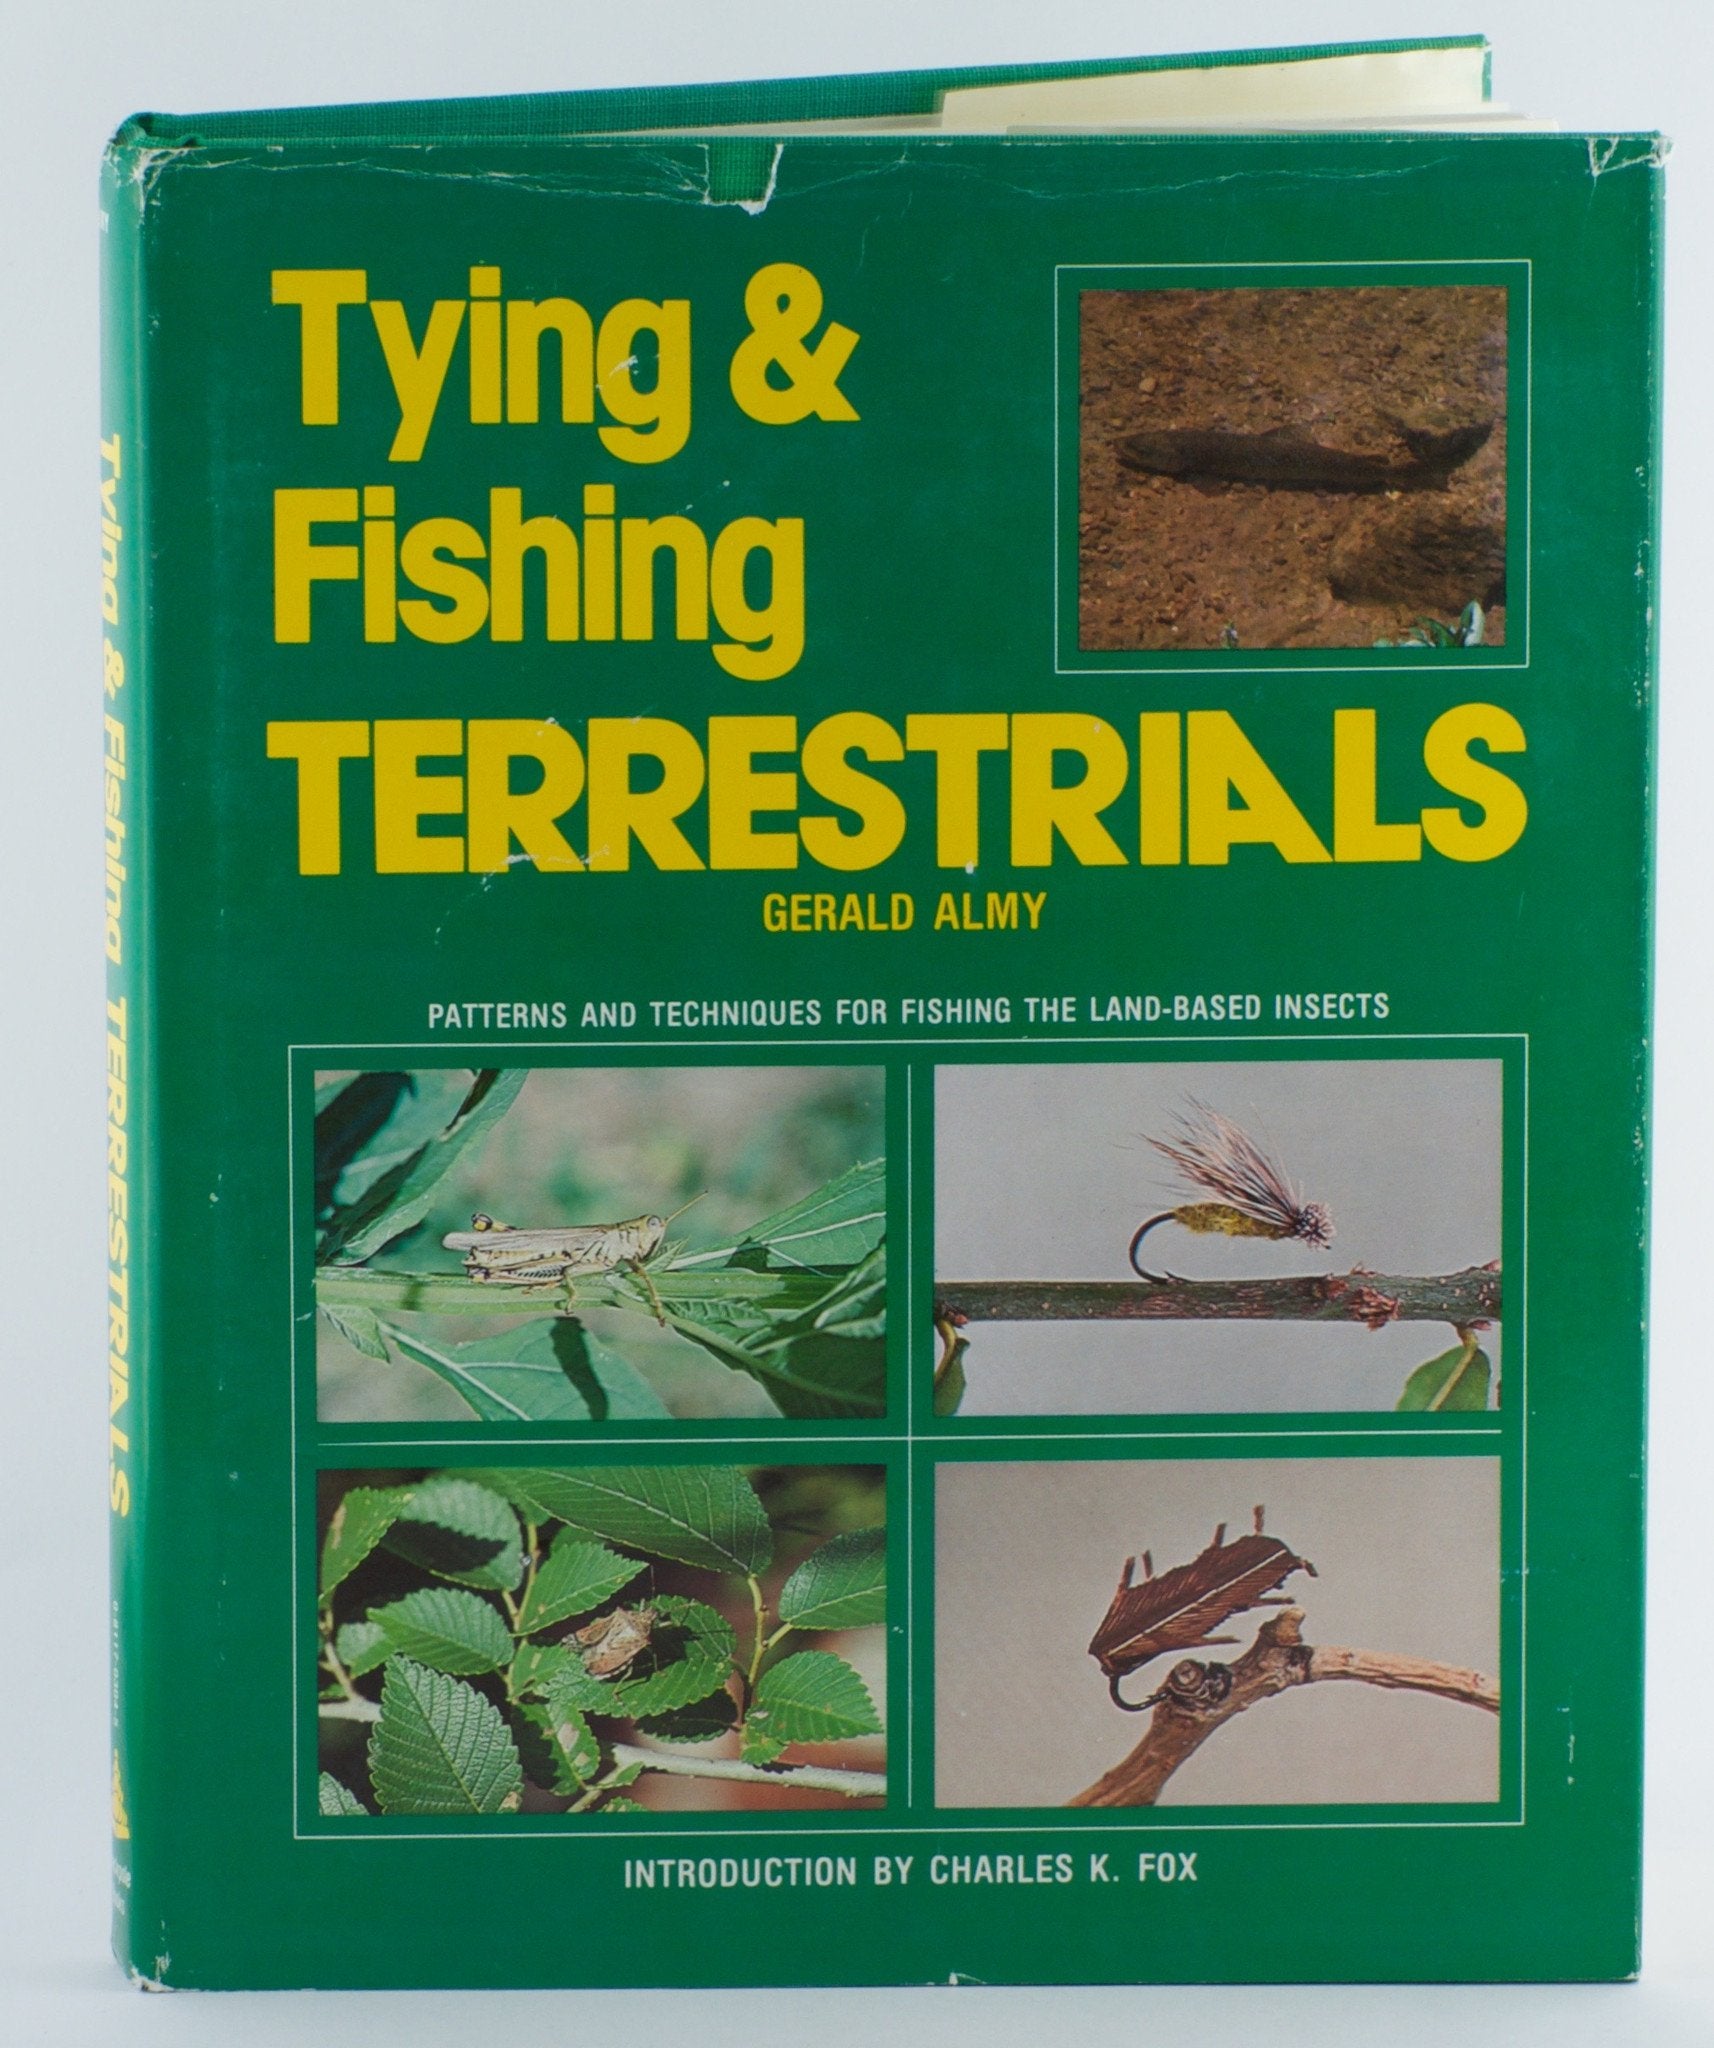 Almy - "Tying and Fishing Terrestrials"